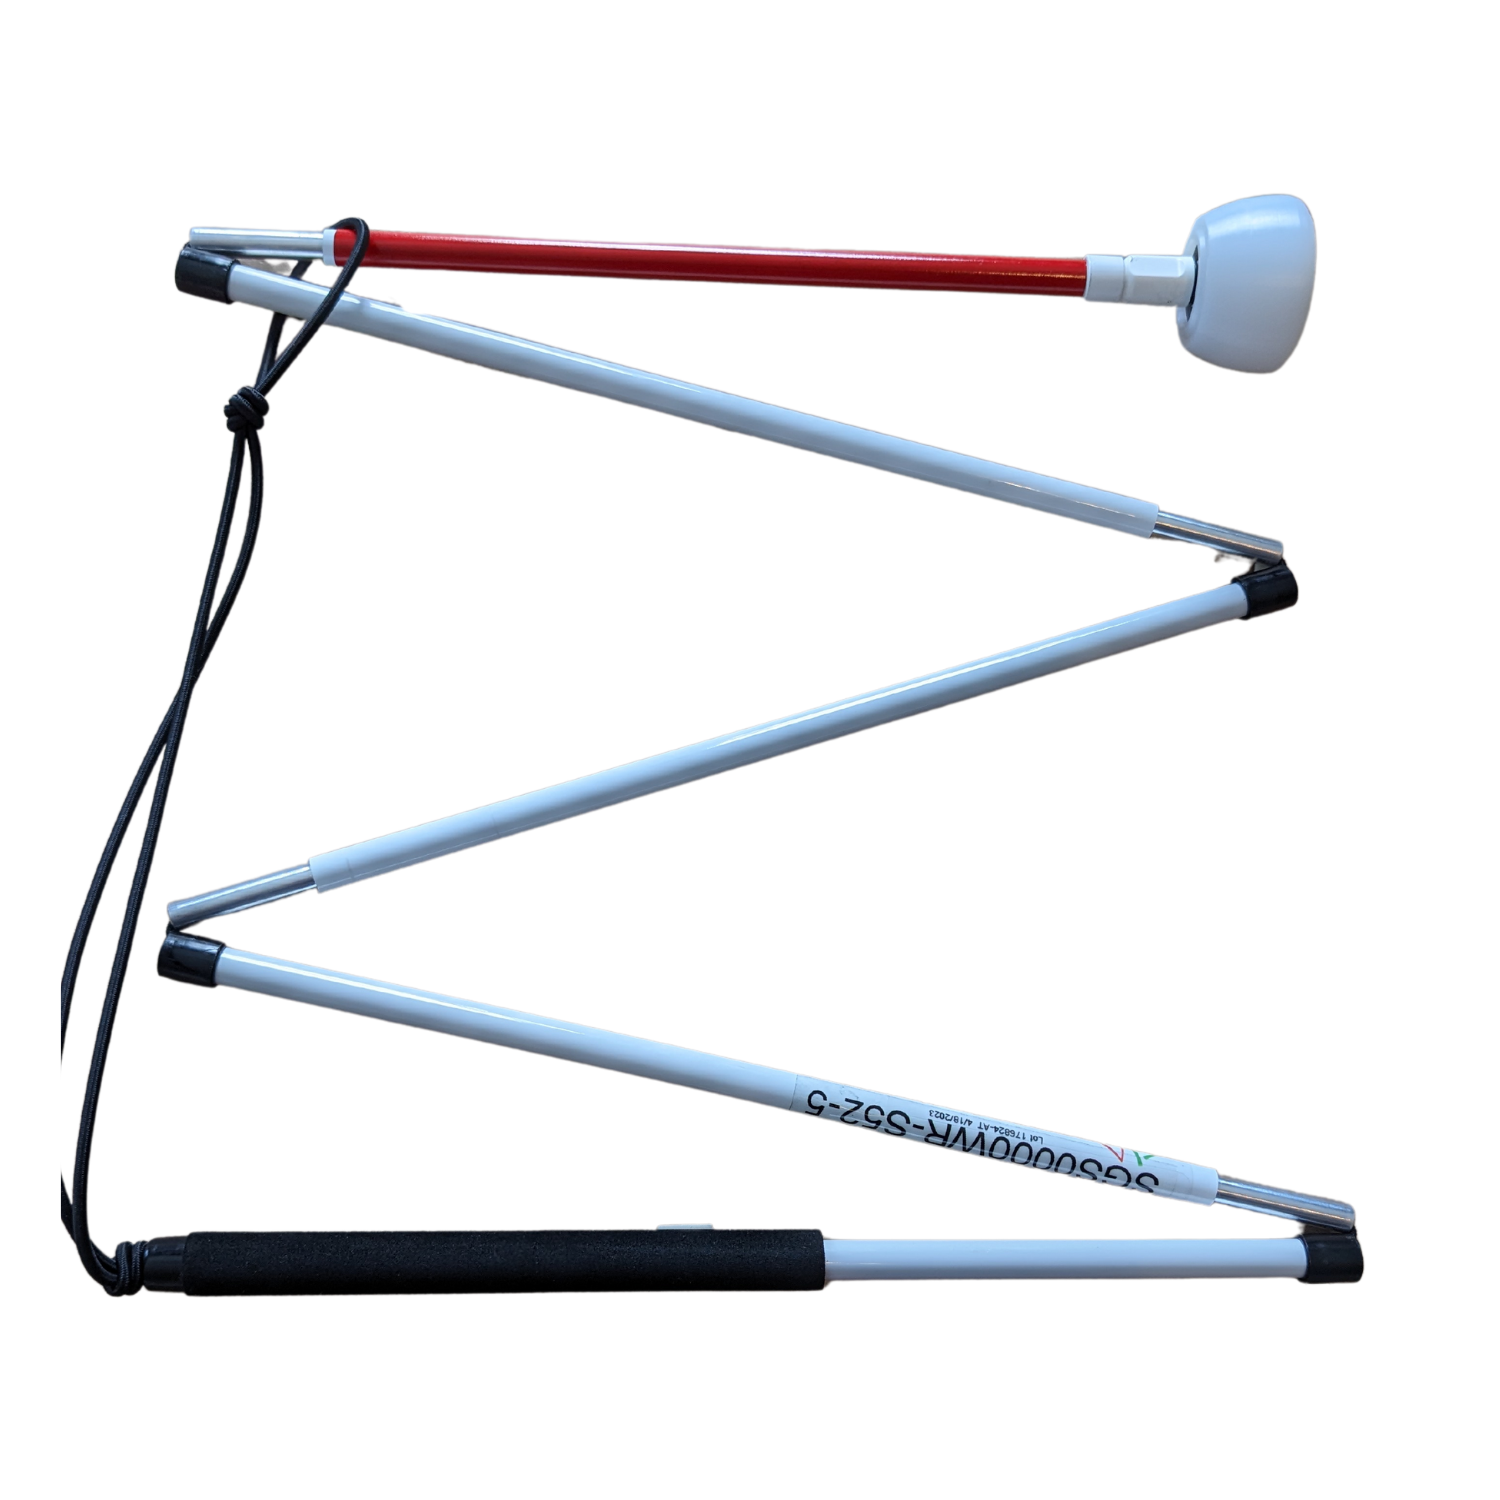 Image of the Slimline graphite mobility cane from Ambutech with a flex tip.